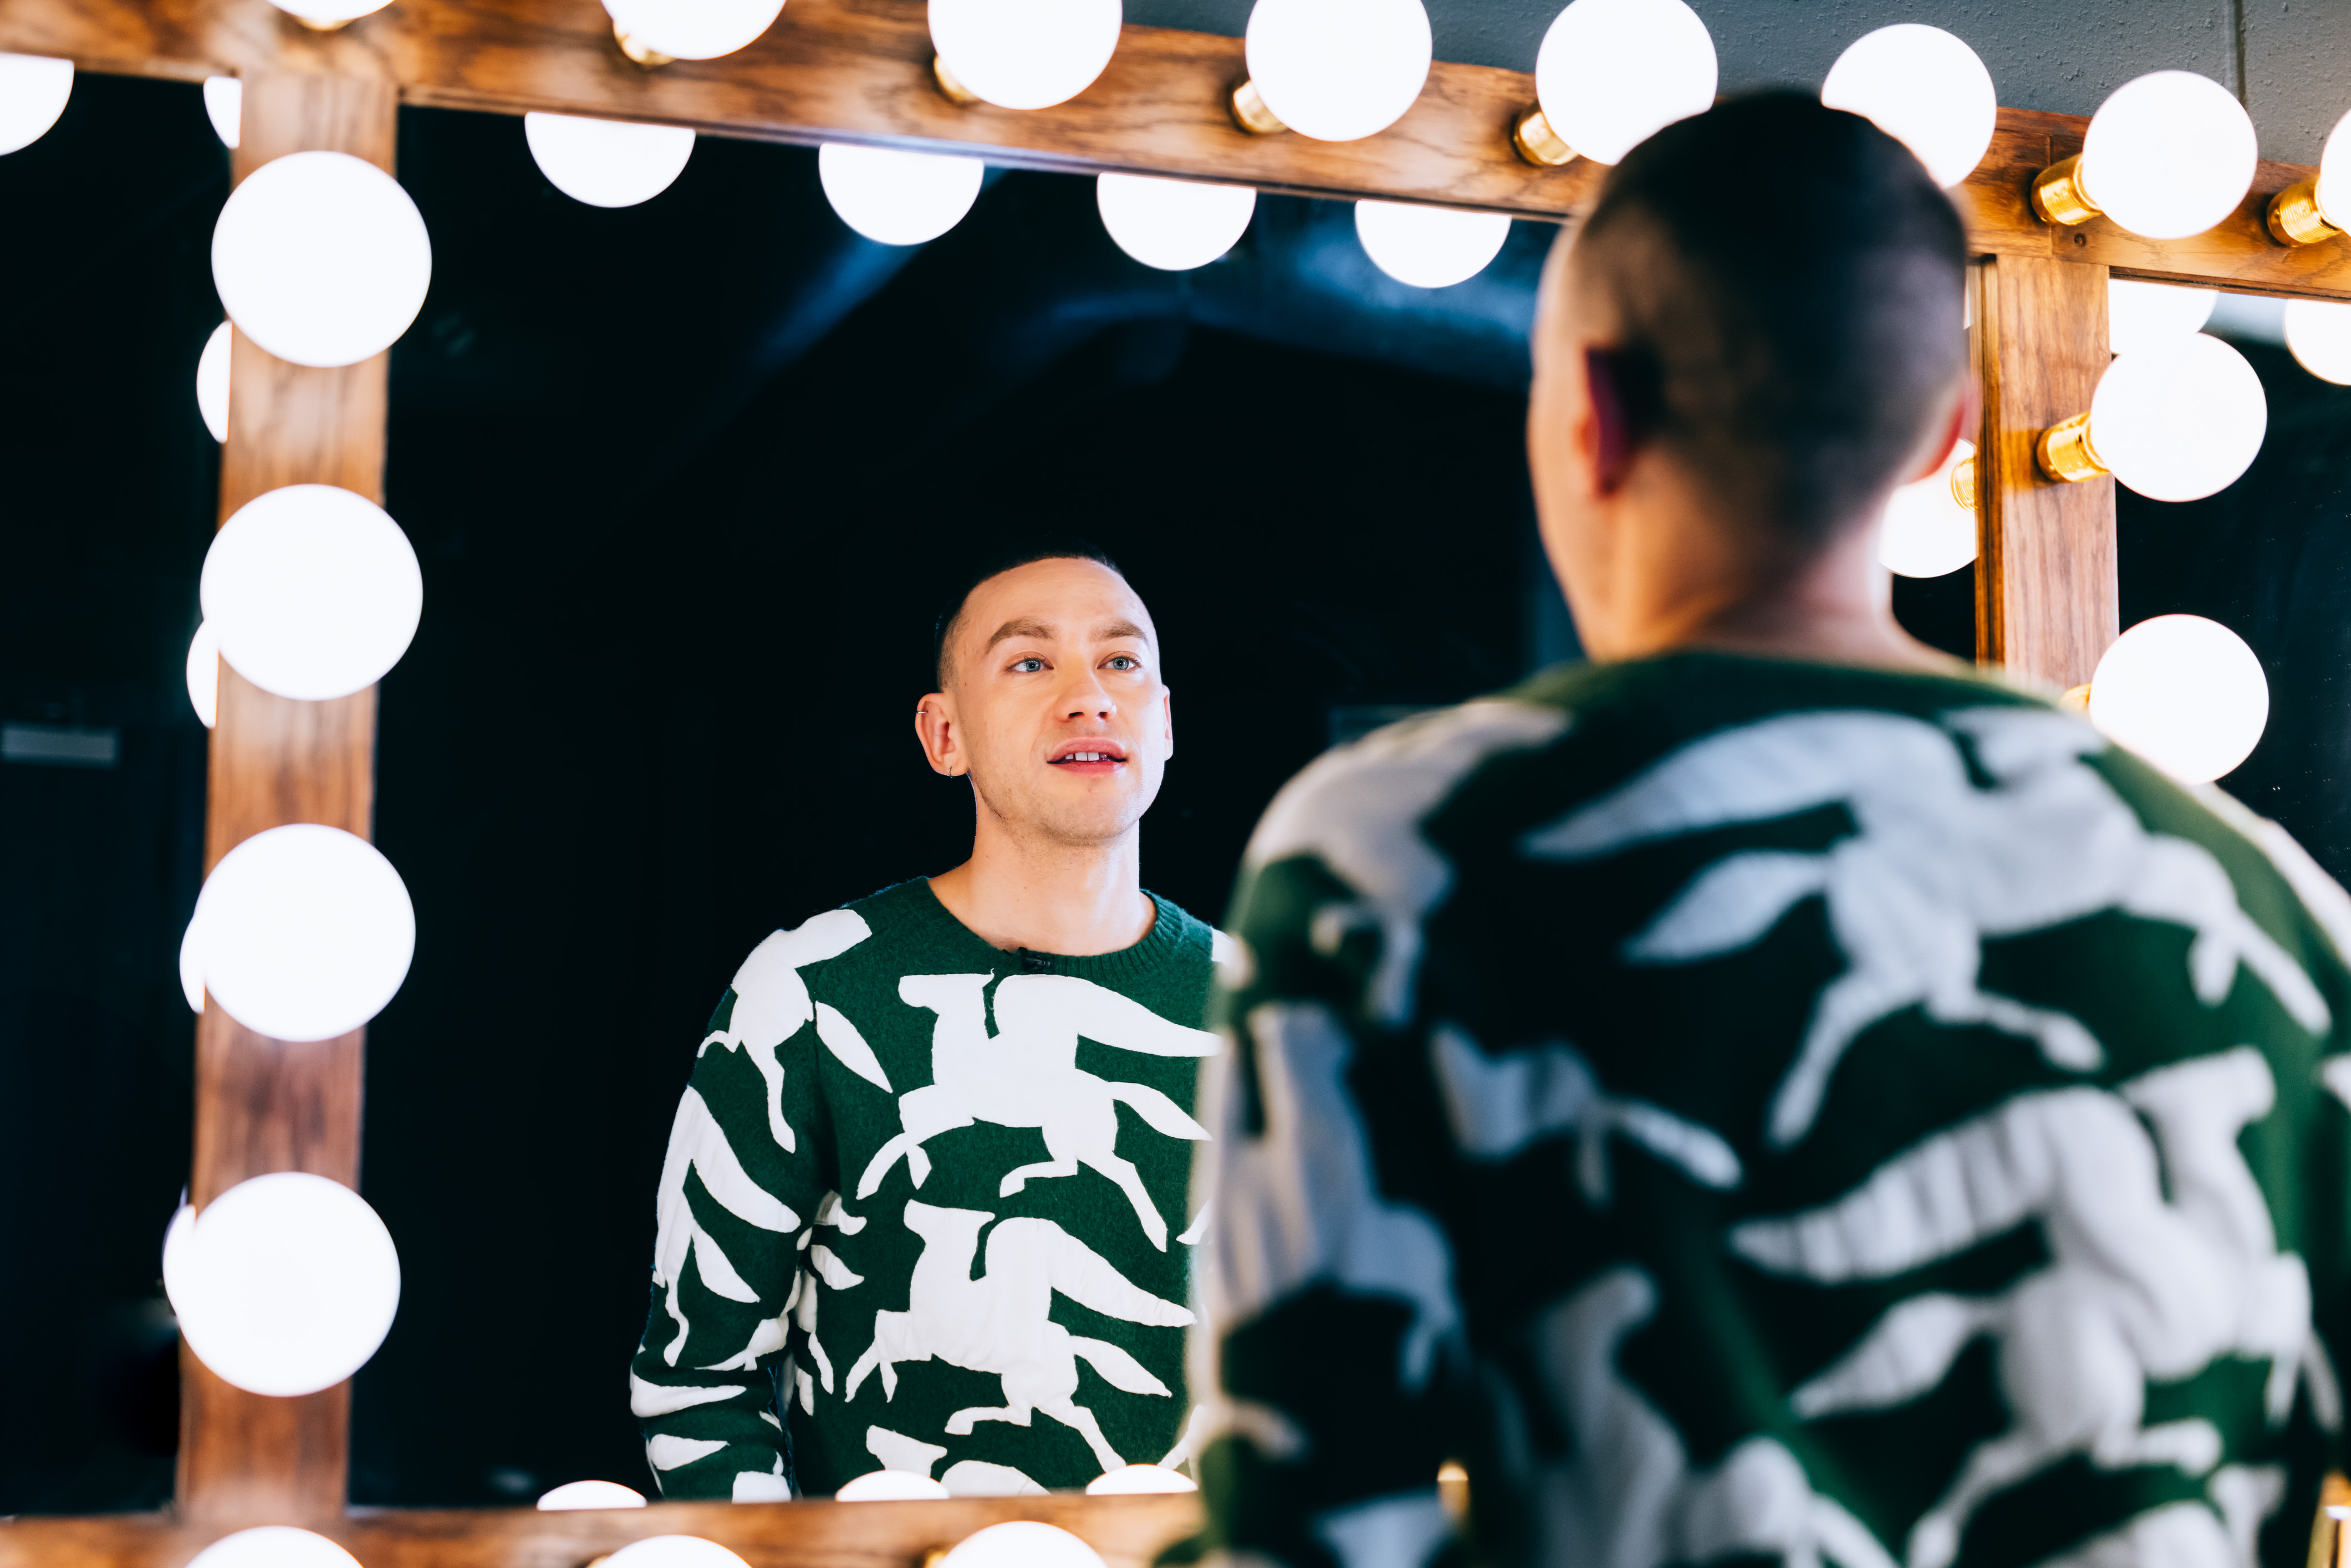 Olly Alexander will be the subject of a no-holds-barred, one-off-documentary for BBC One